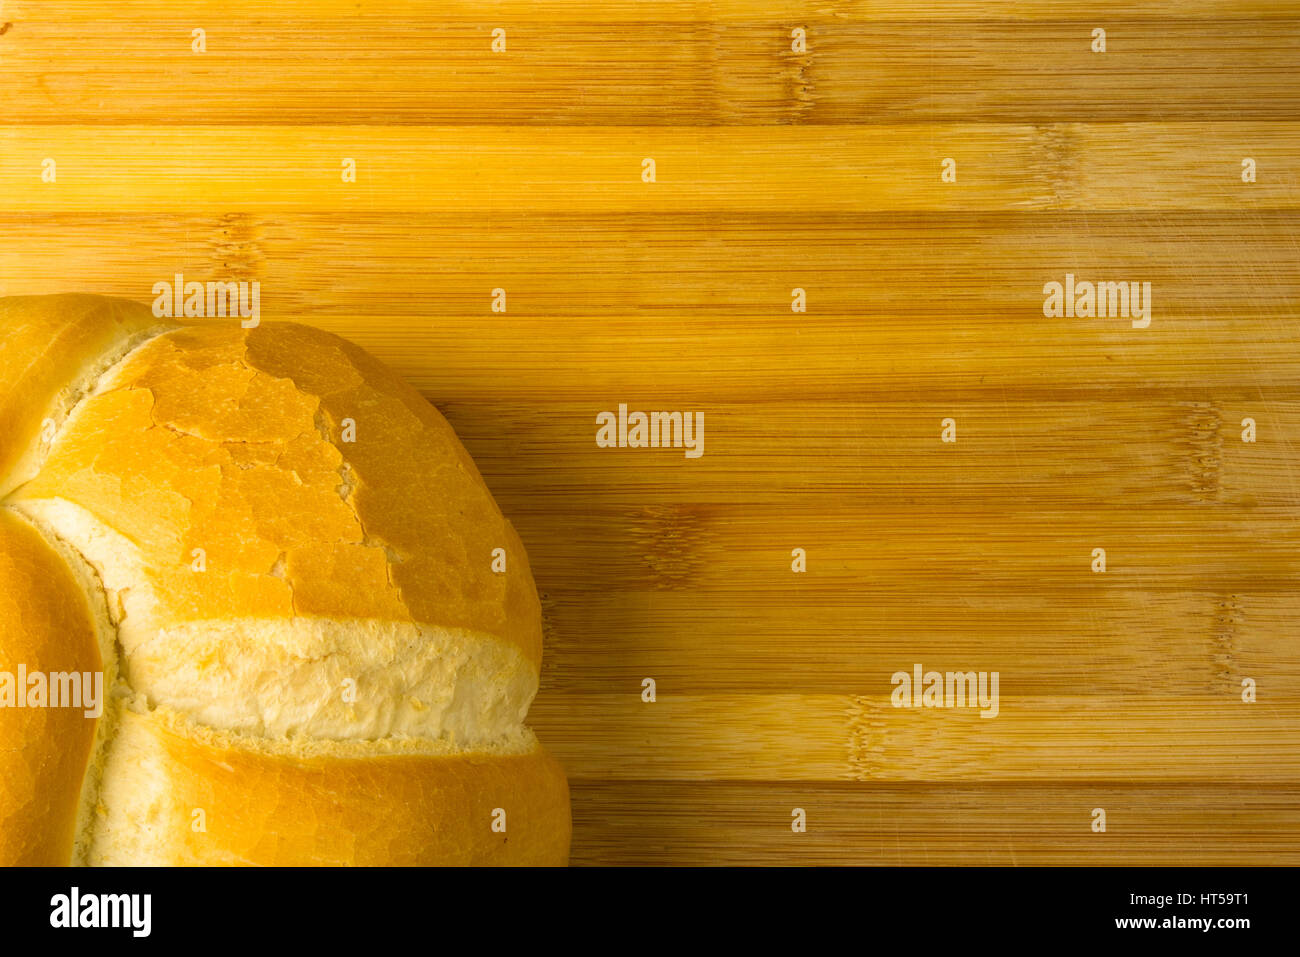 fresh braided loaf of white wheat bread on bamboo wooden background Stock Photo